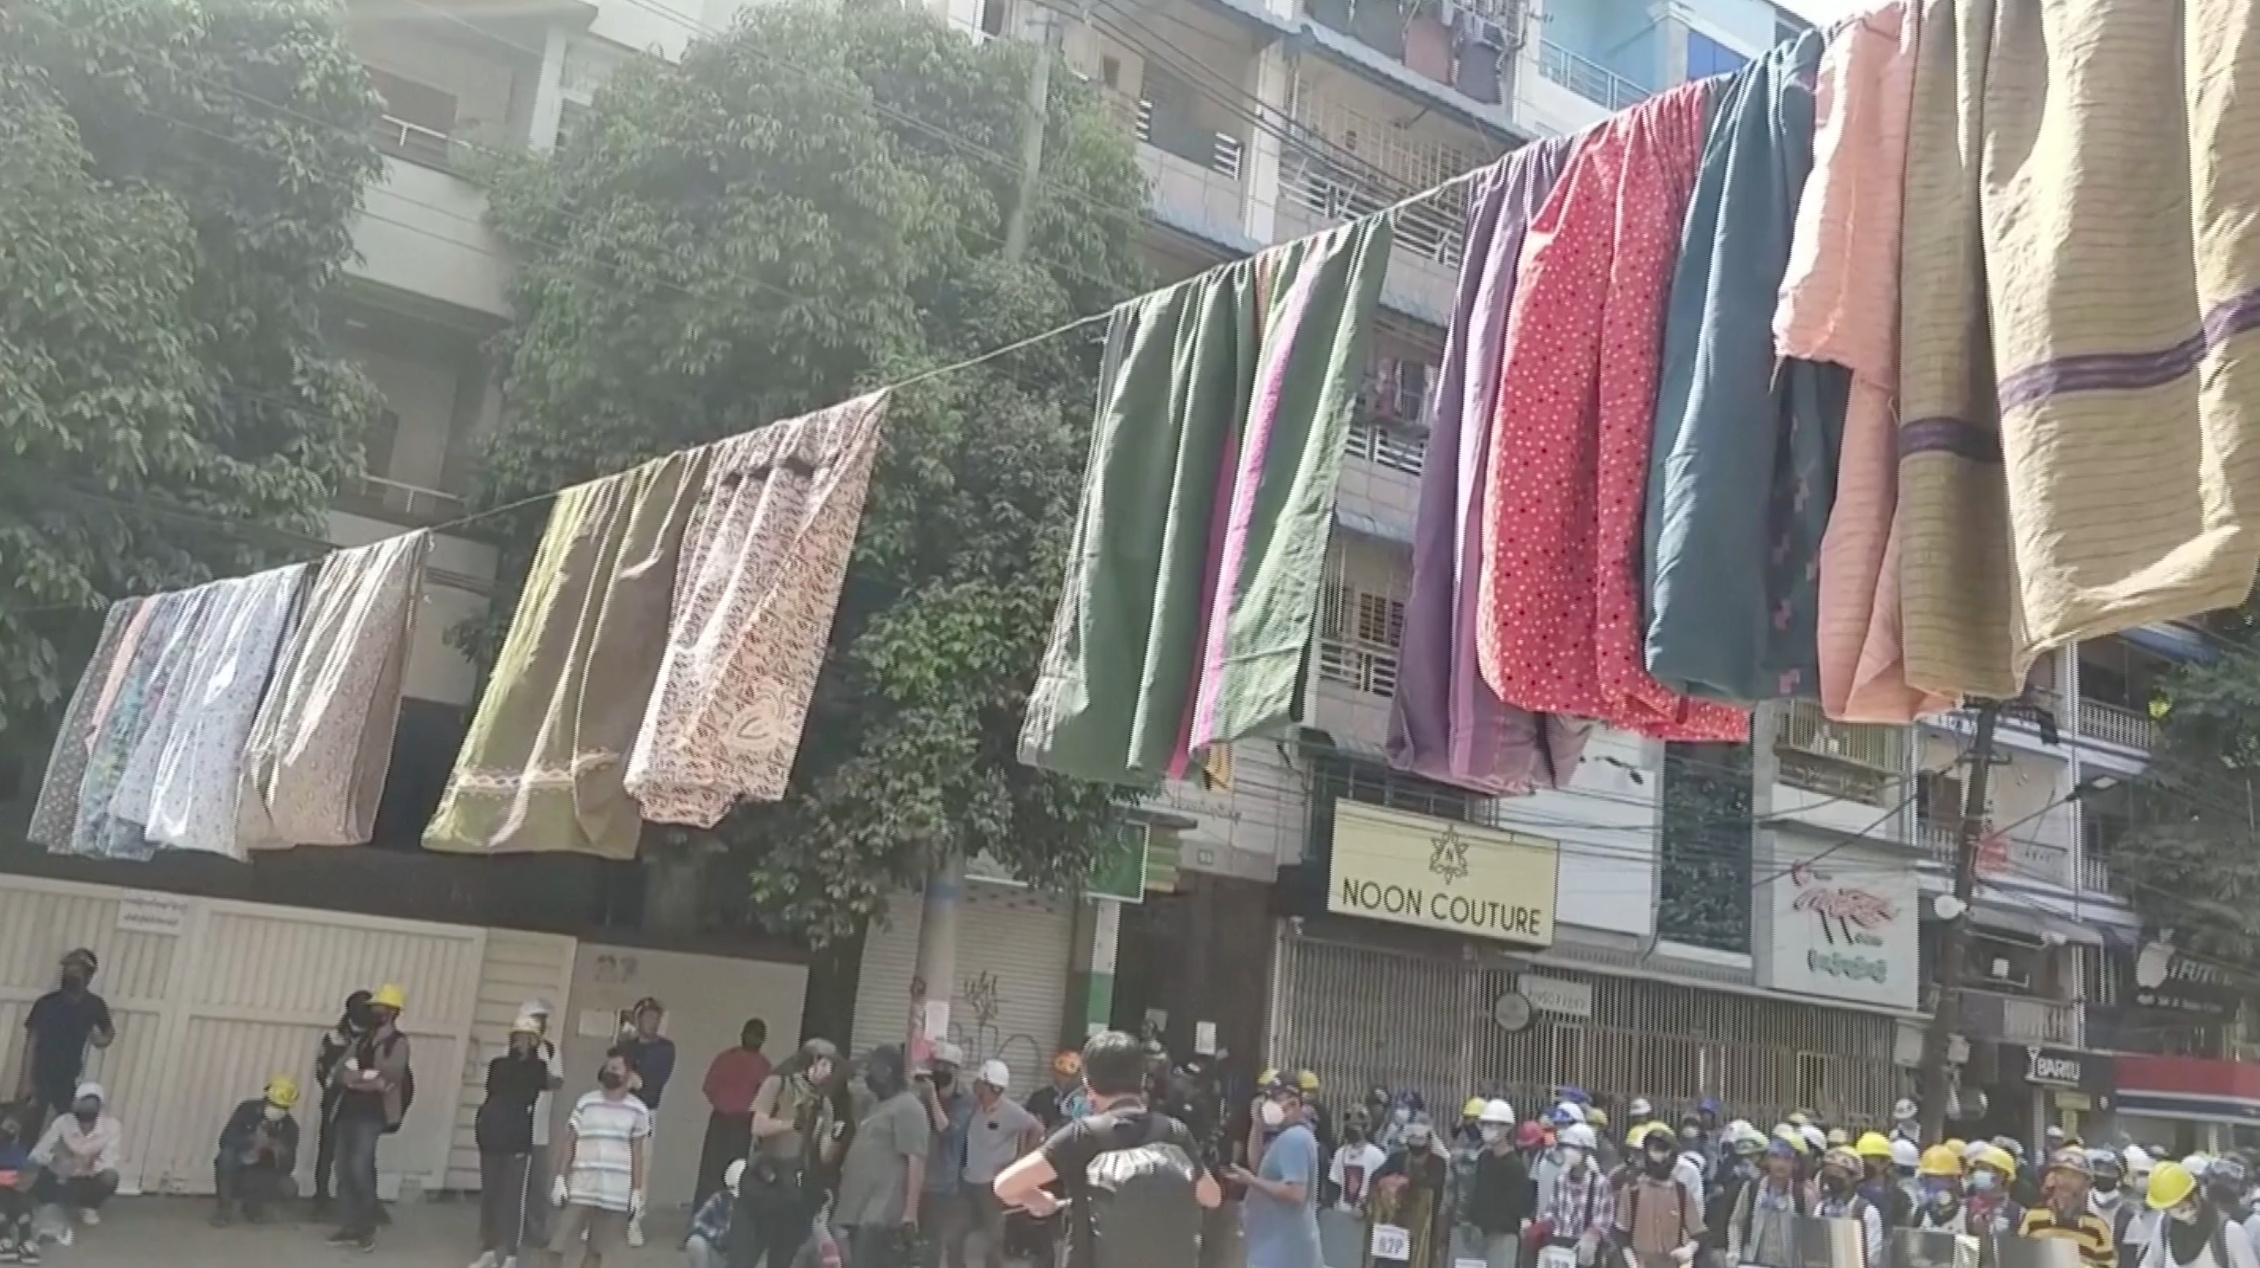 Traditional clothes hang on a rope as protesters hold shields in the background, in Yangon